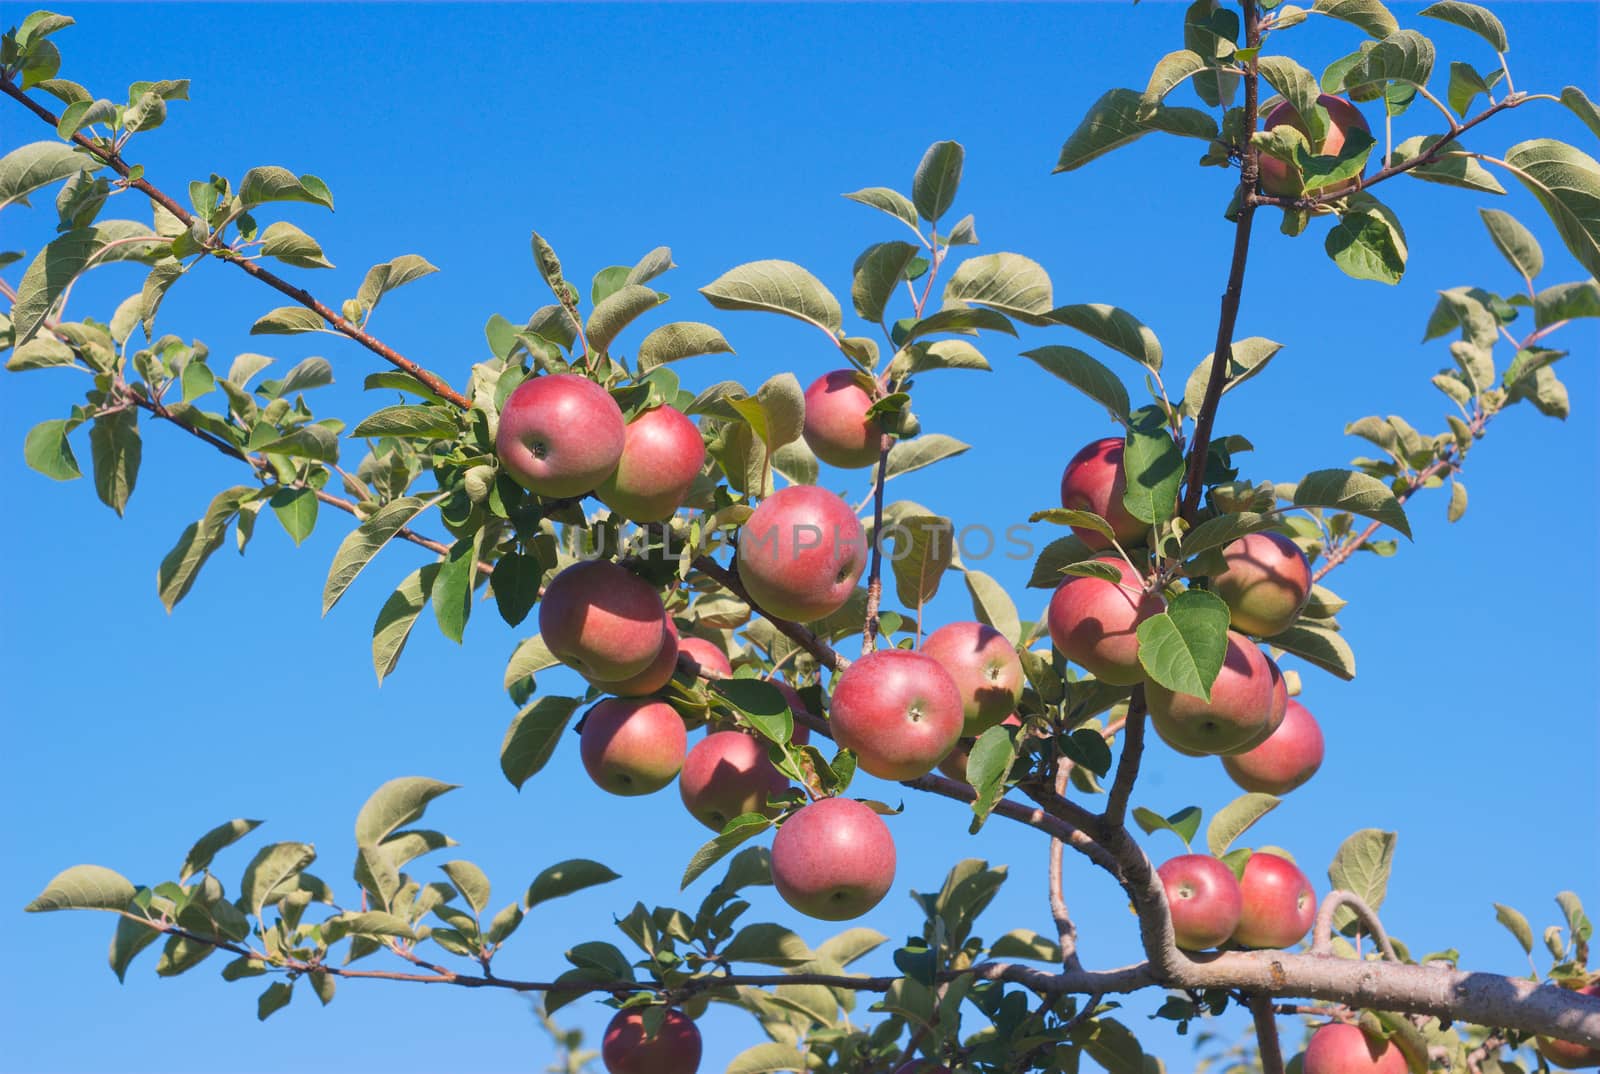 many apples in tree, branch orchard on blue sky by jacquesdurocher